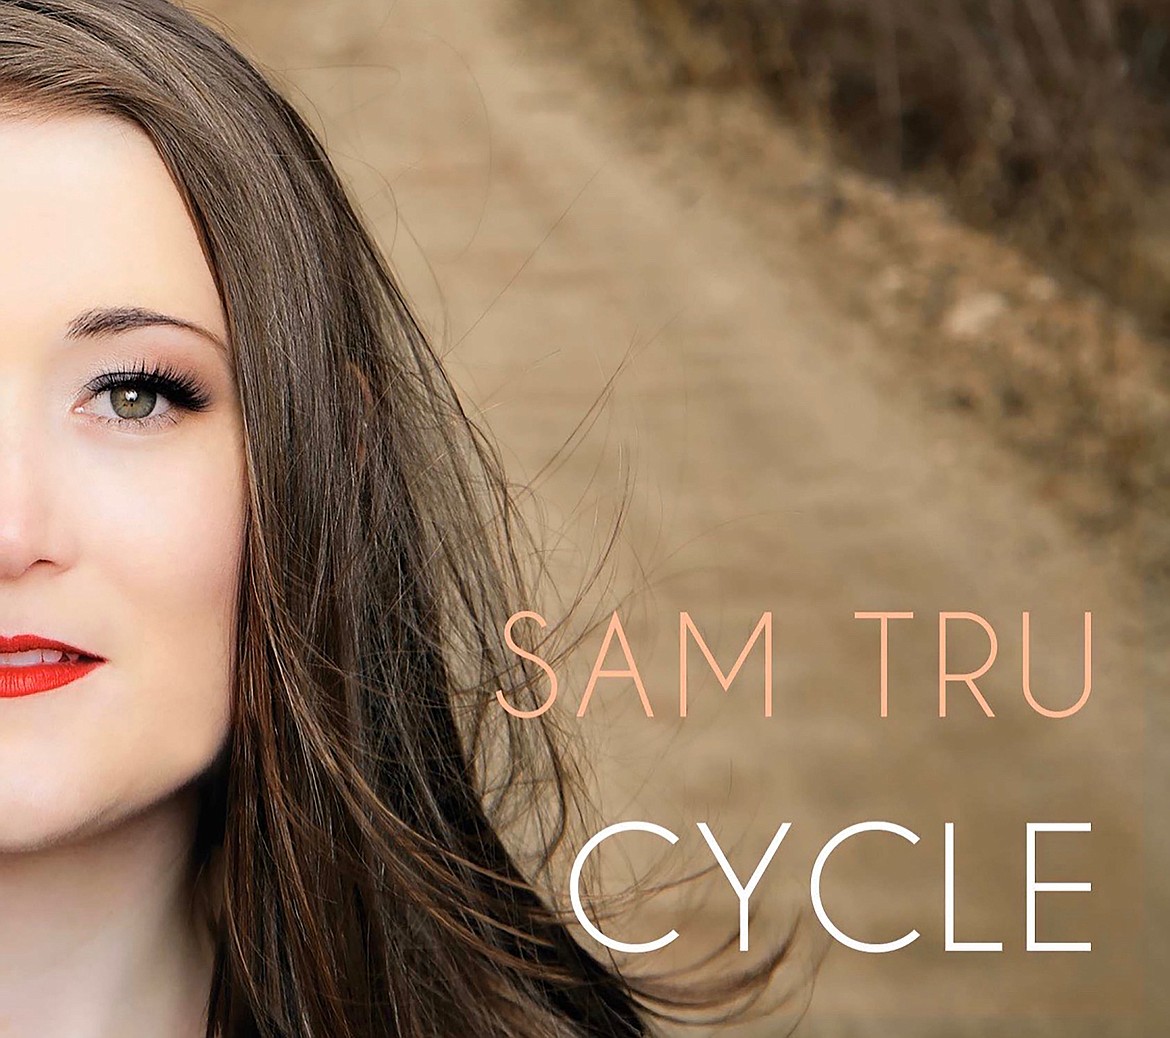 The album cover of "Cycle", the debut album of Sam Tru, made its way onto several Grammy nomination lists.